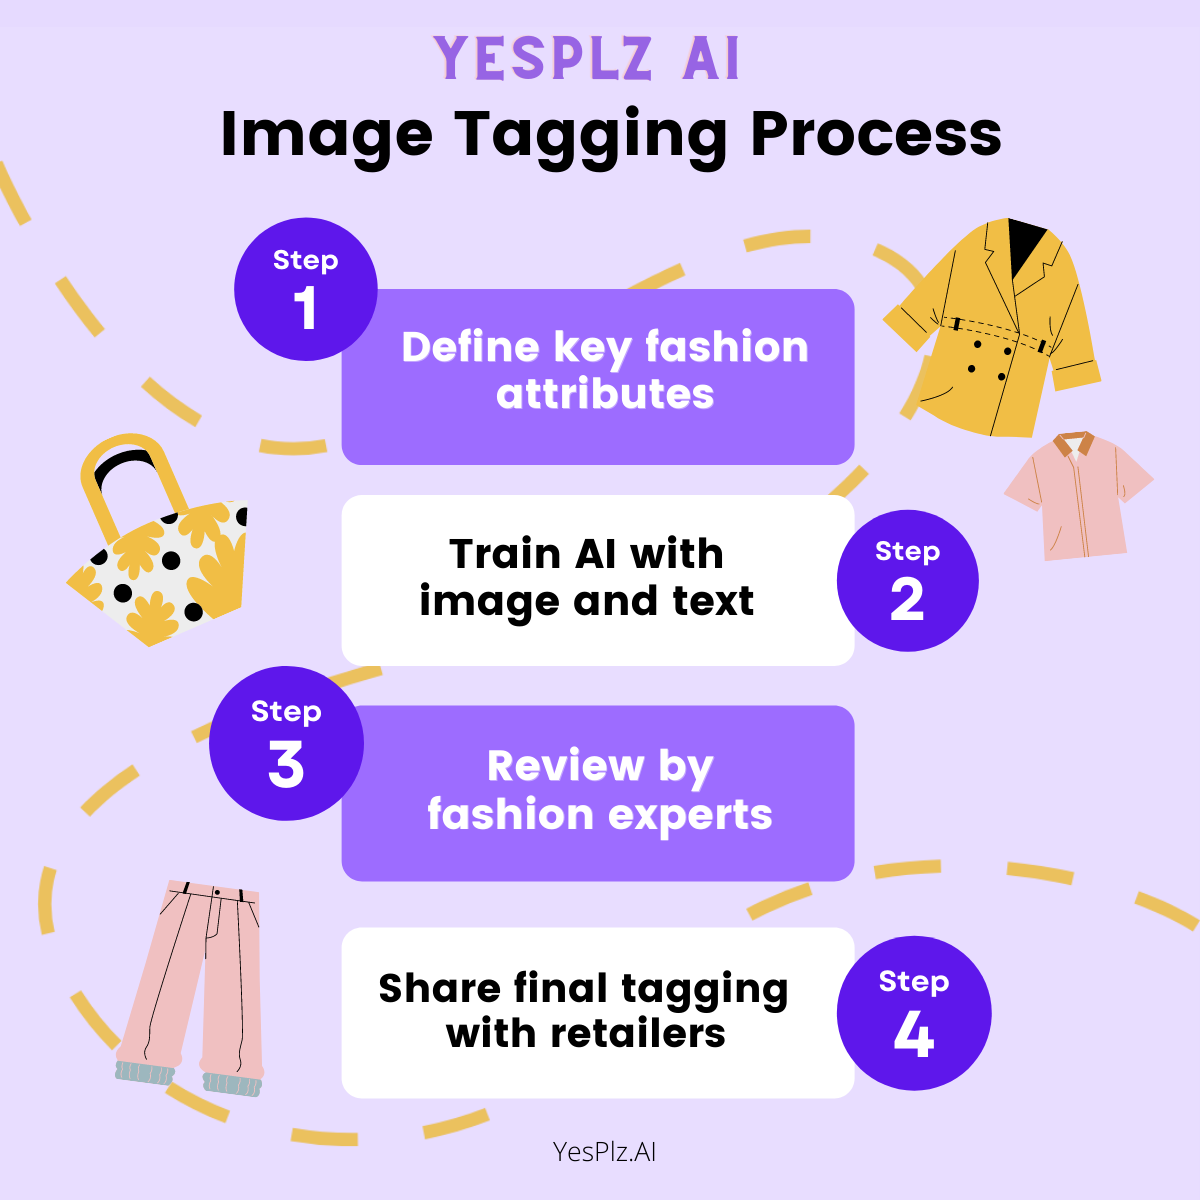 An infographic showing YesPlz image tagging process